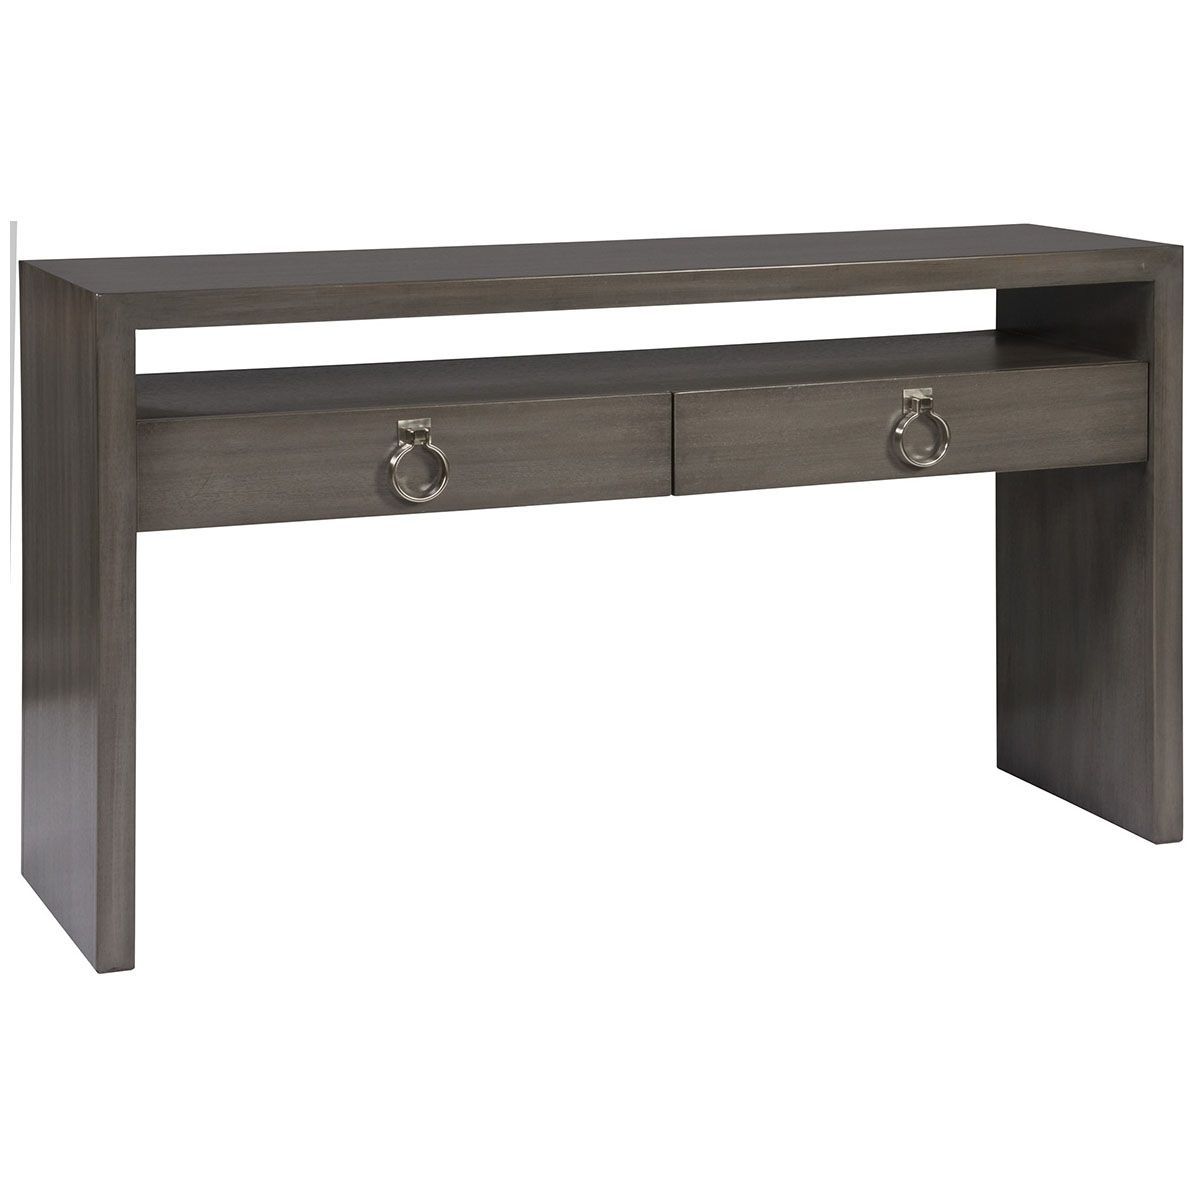 Vanguard Furniture Margo Console W349s Lg | Vanguad Furniture Within Parsons White Marble Top &amp; Dark Steel Base 48x16 Console Tables (Photo 16 of 30)